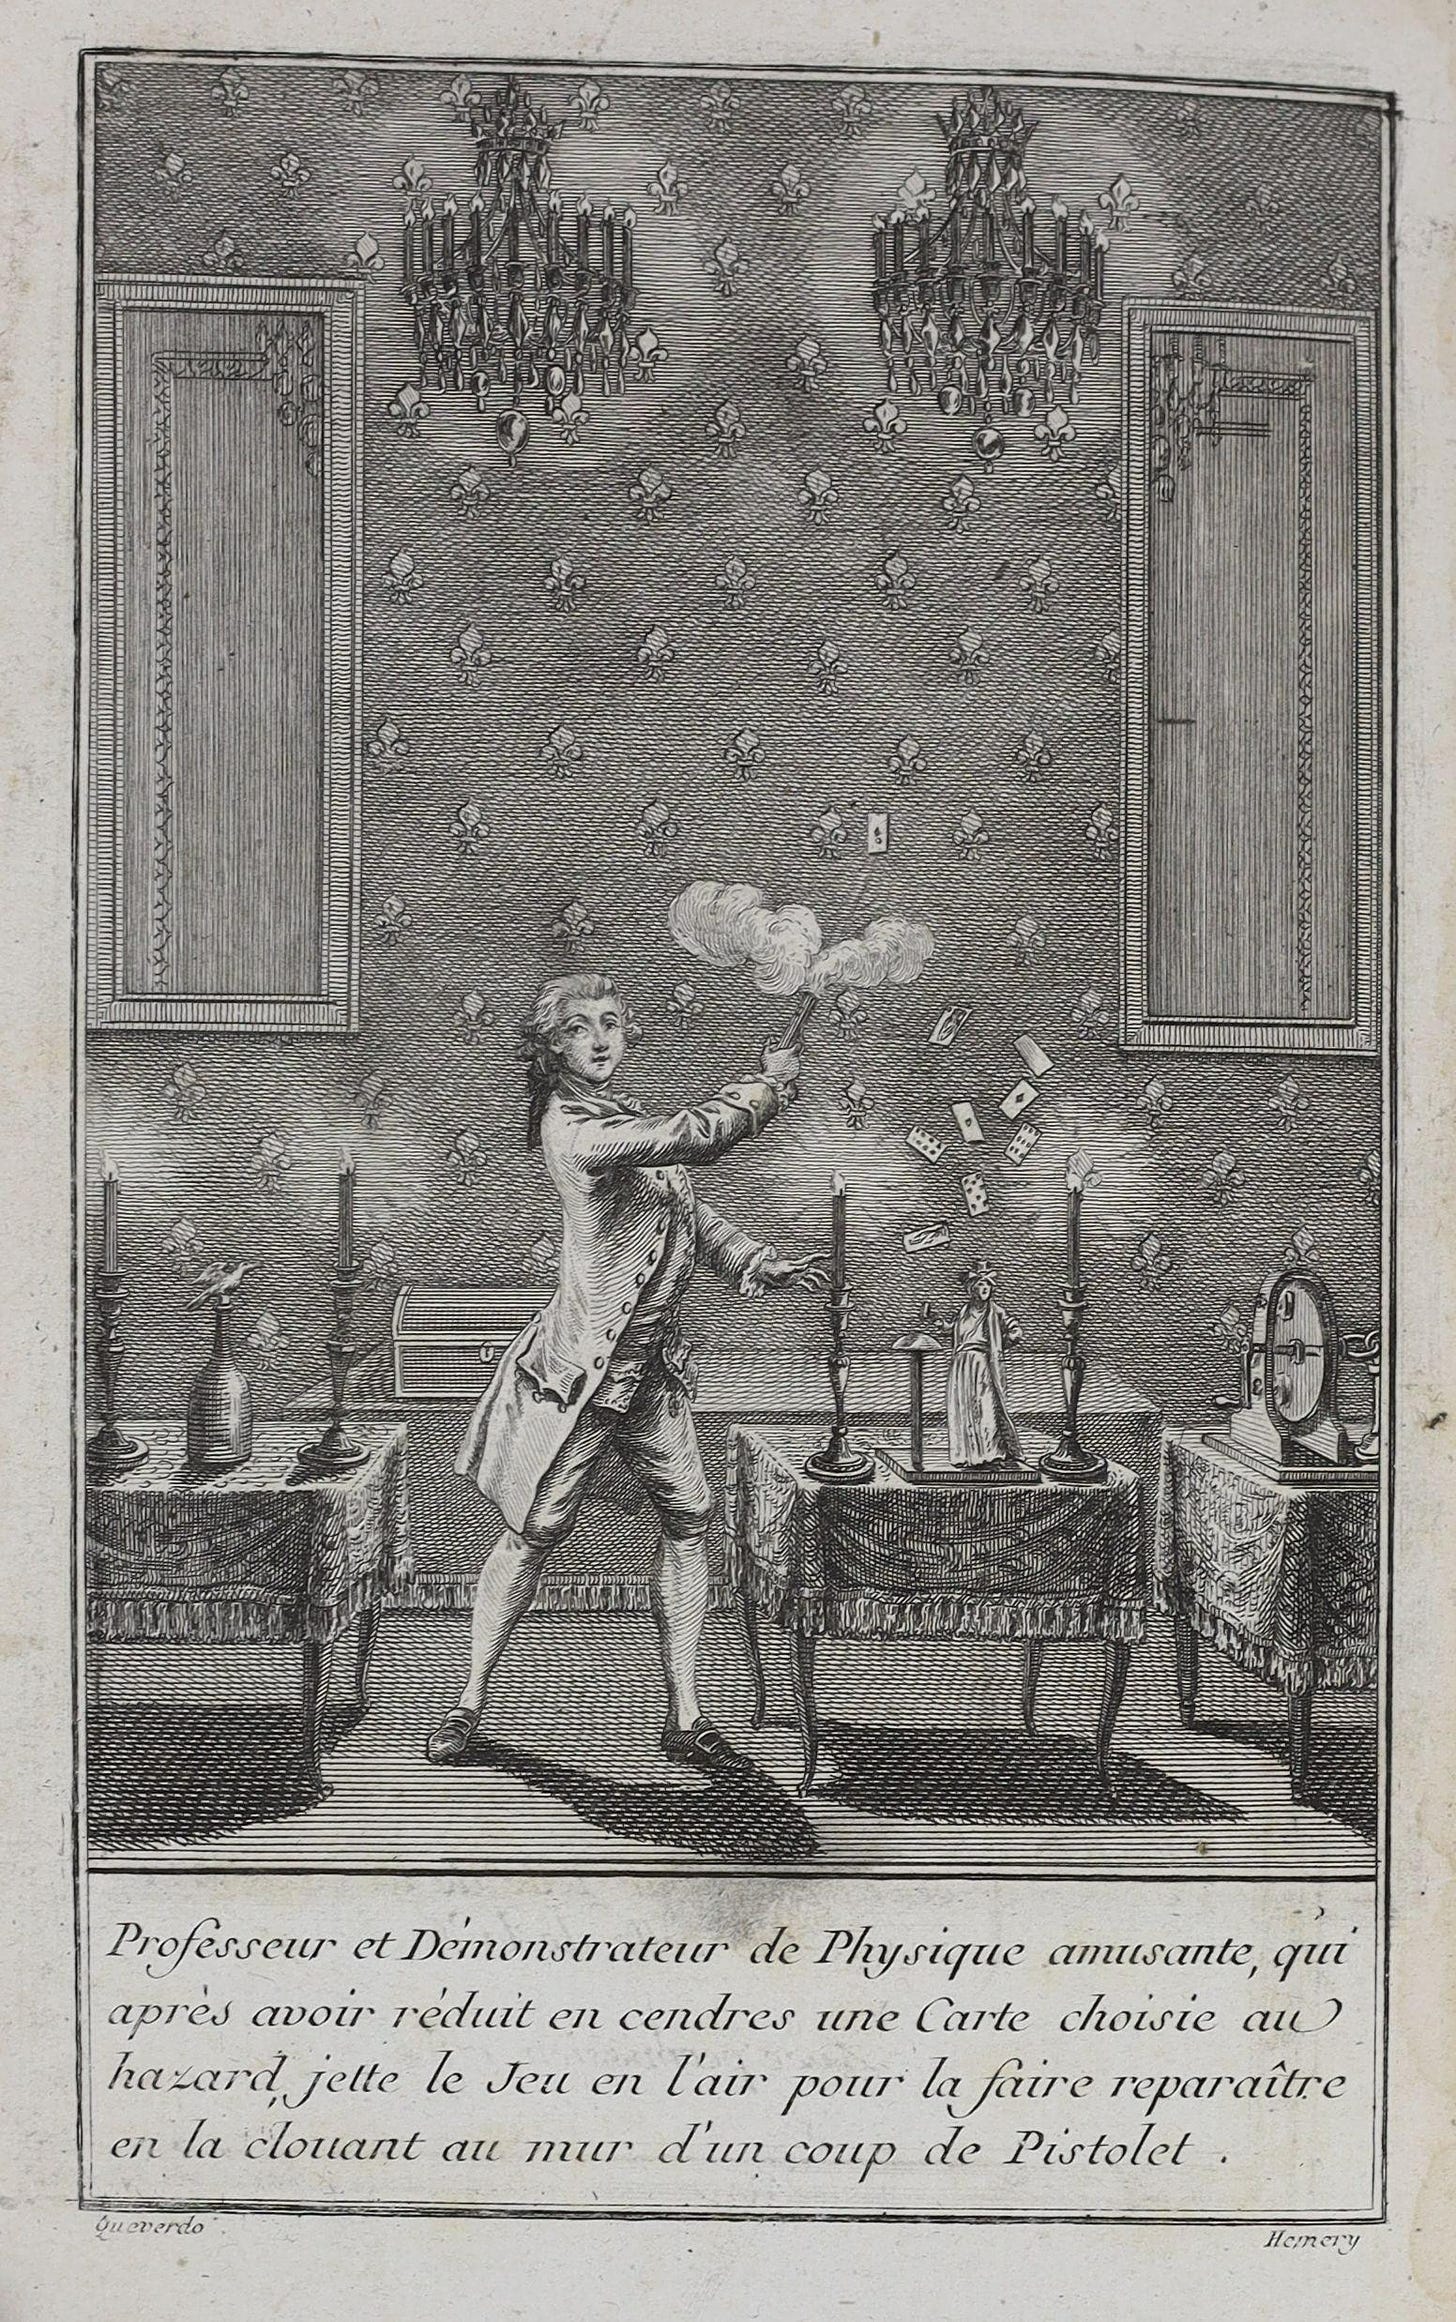 An engraving of a magician firing a pistol on an ornate stage set